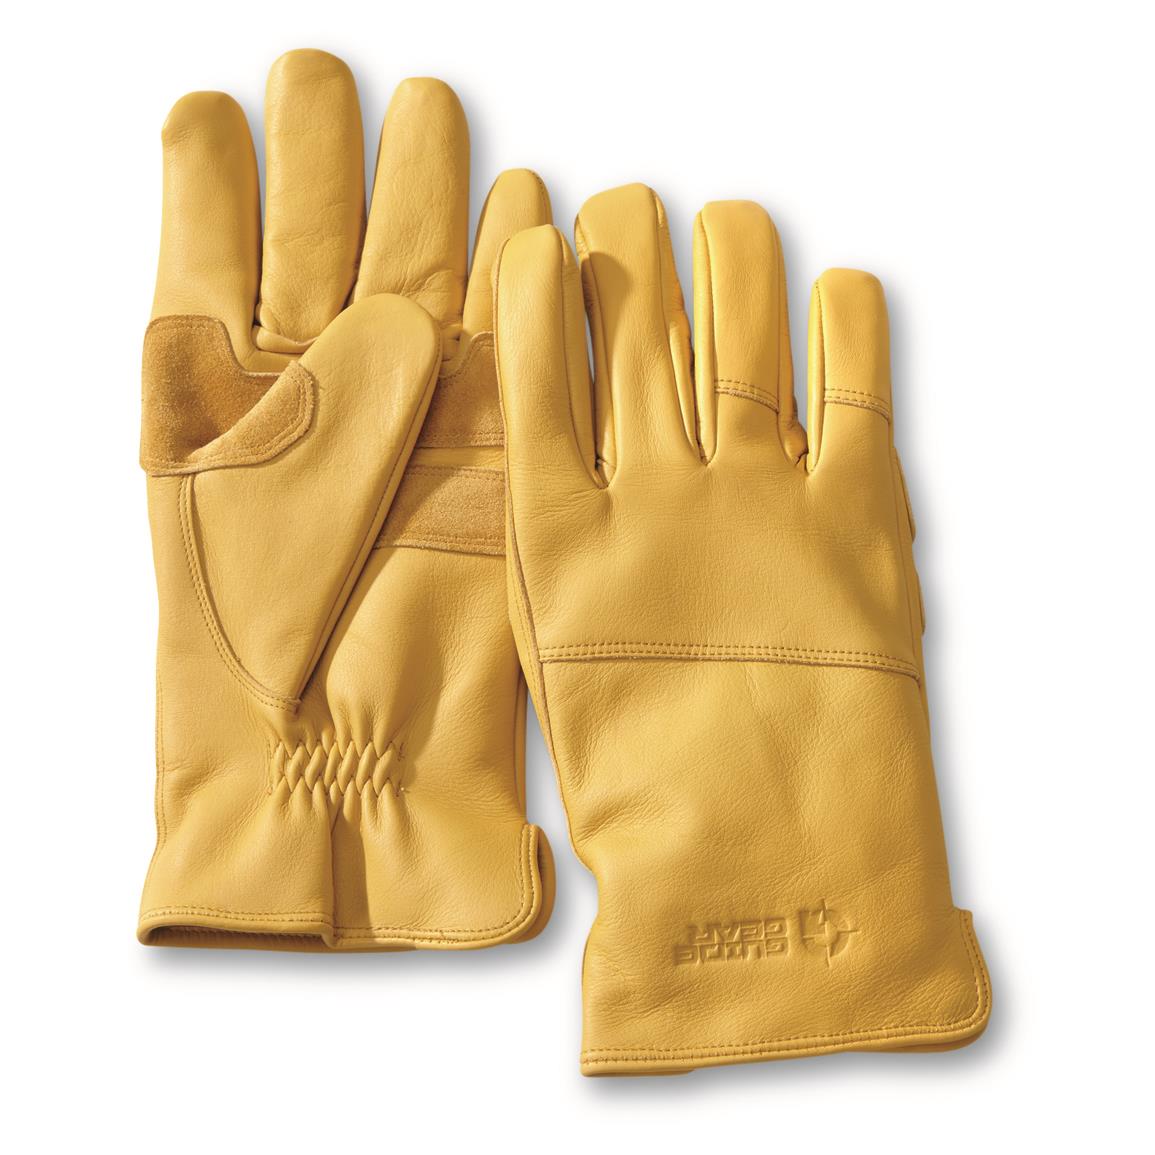 Guide Gear Waterproof Insulated Leather Gloves, Tan